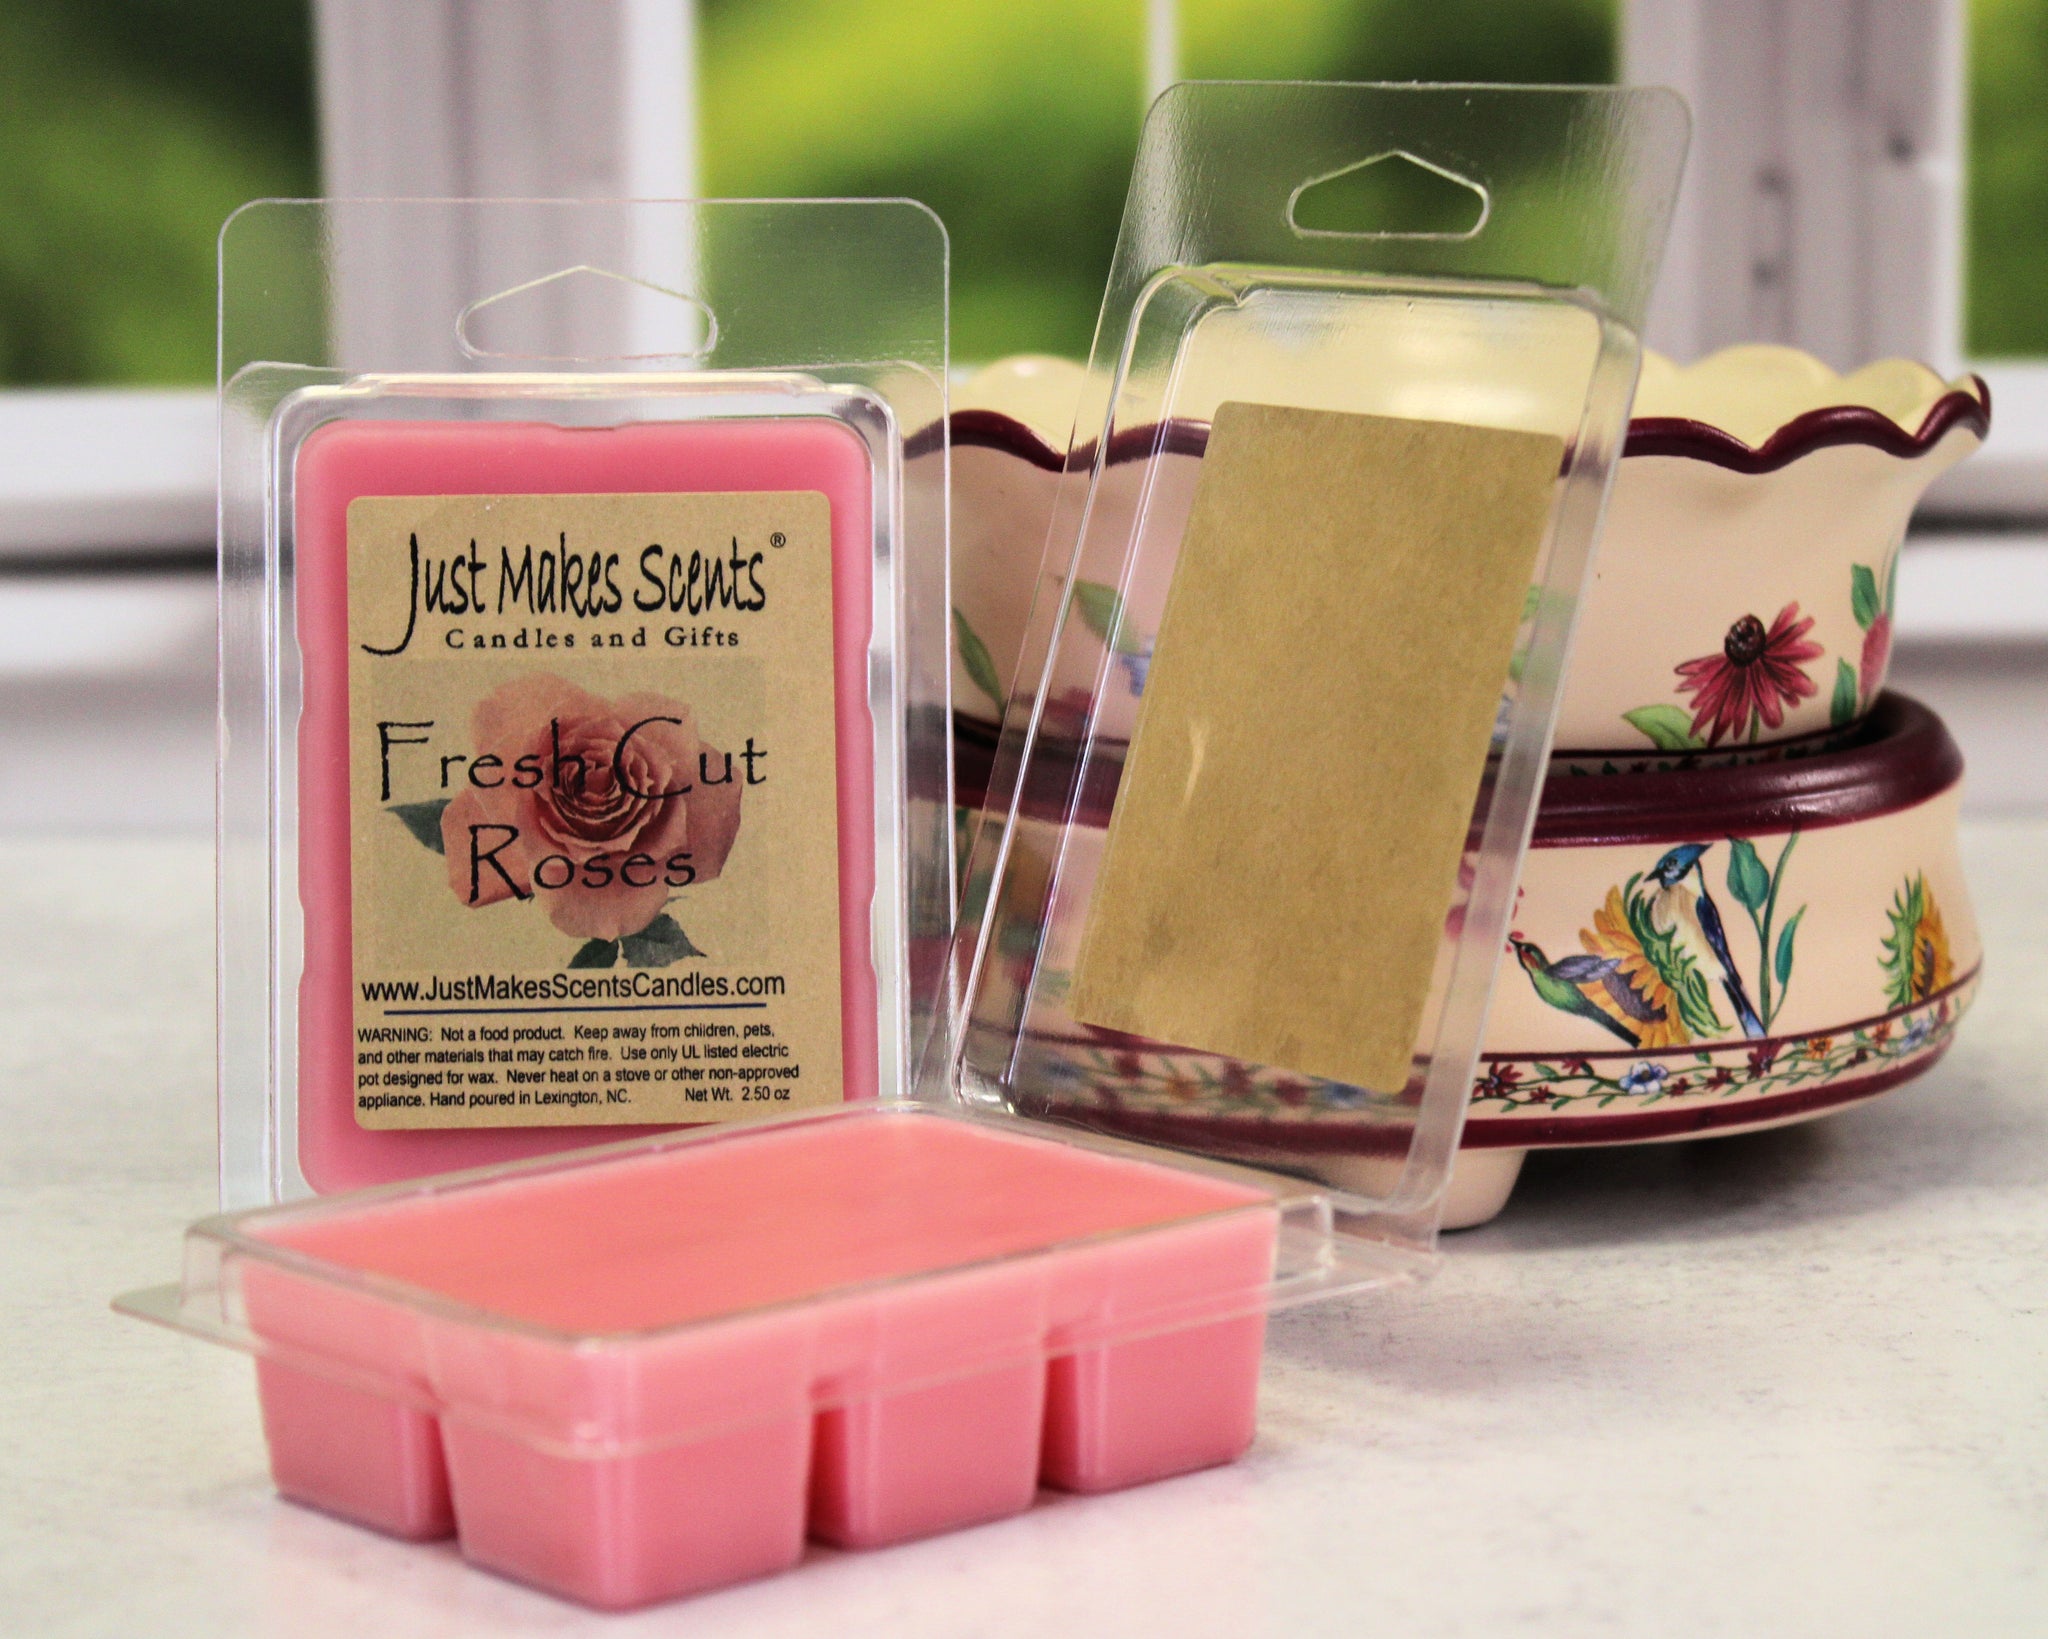 How to Store Candles and Wax Melts